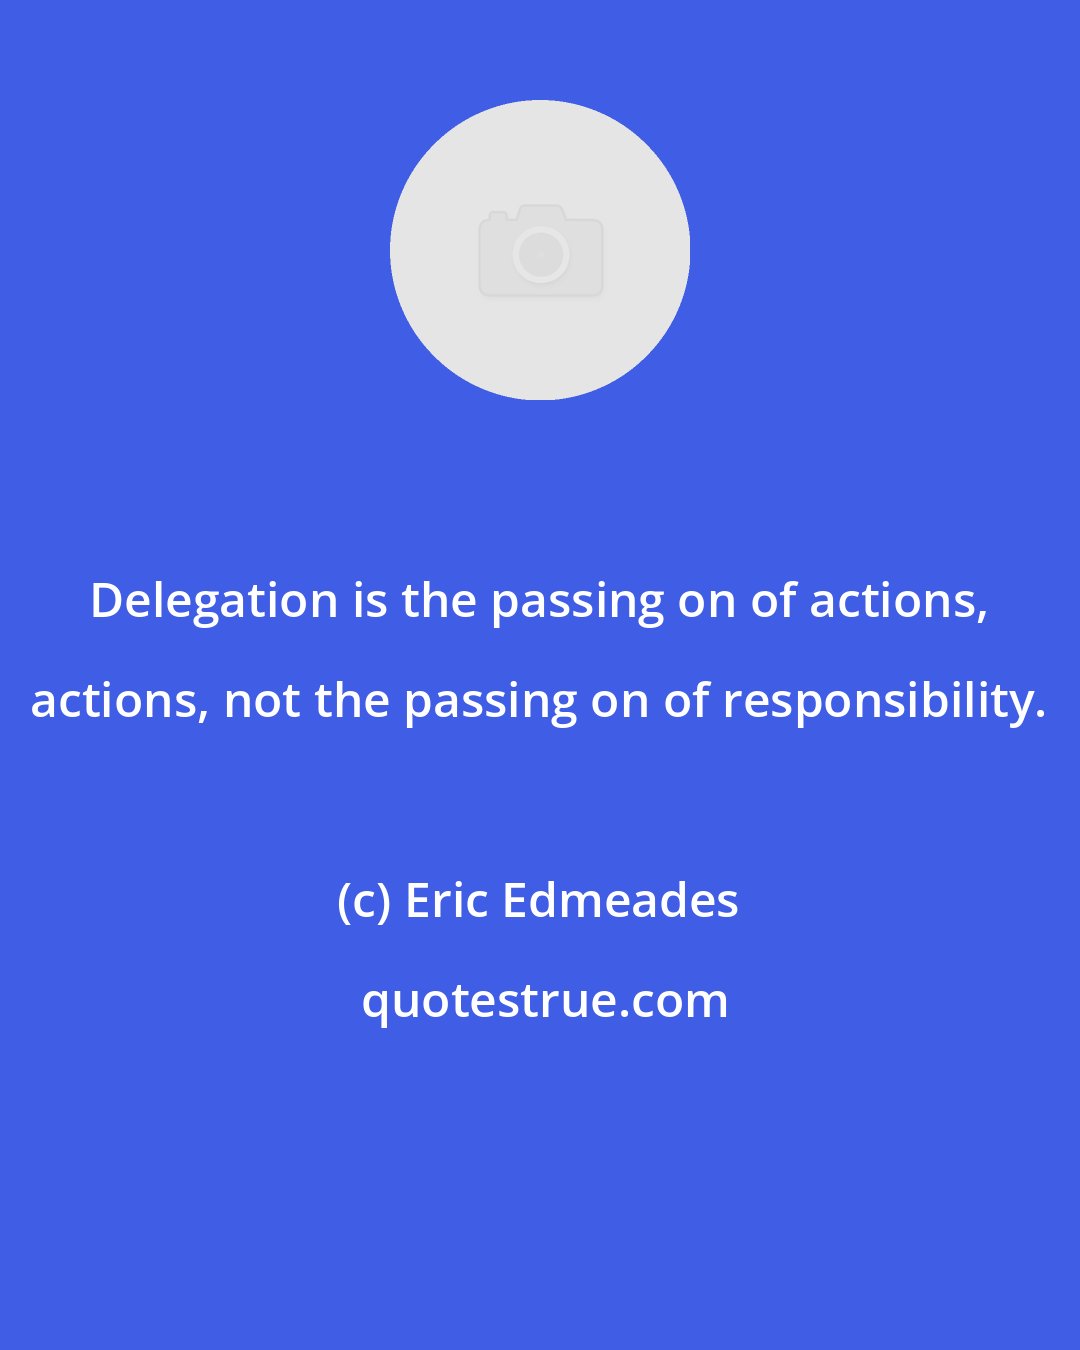 Eric Edmeades: Delegation is the passing on of actions, actions, not the passing on of responsibility.